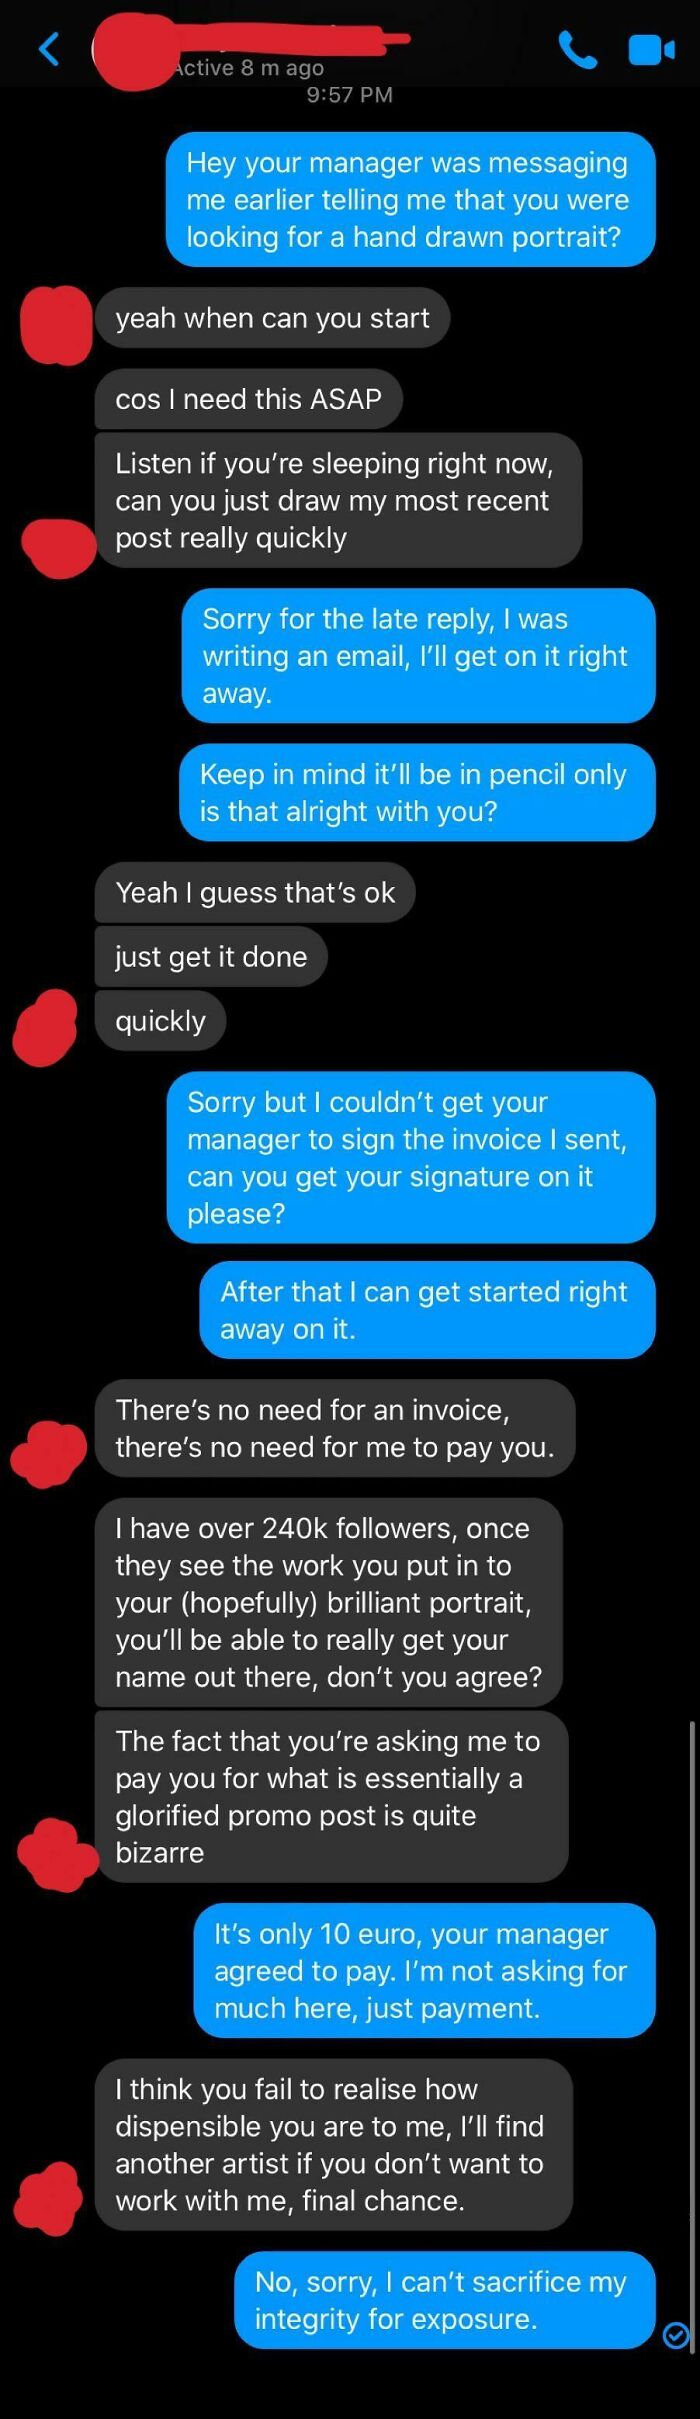 My Friend Got Shorted By A Pretty Major Influencer